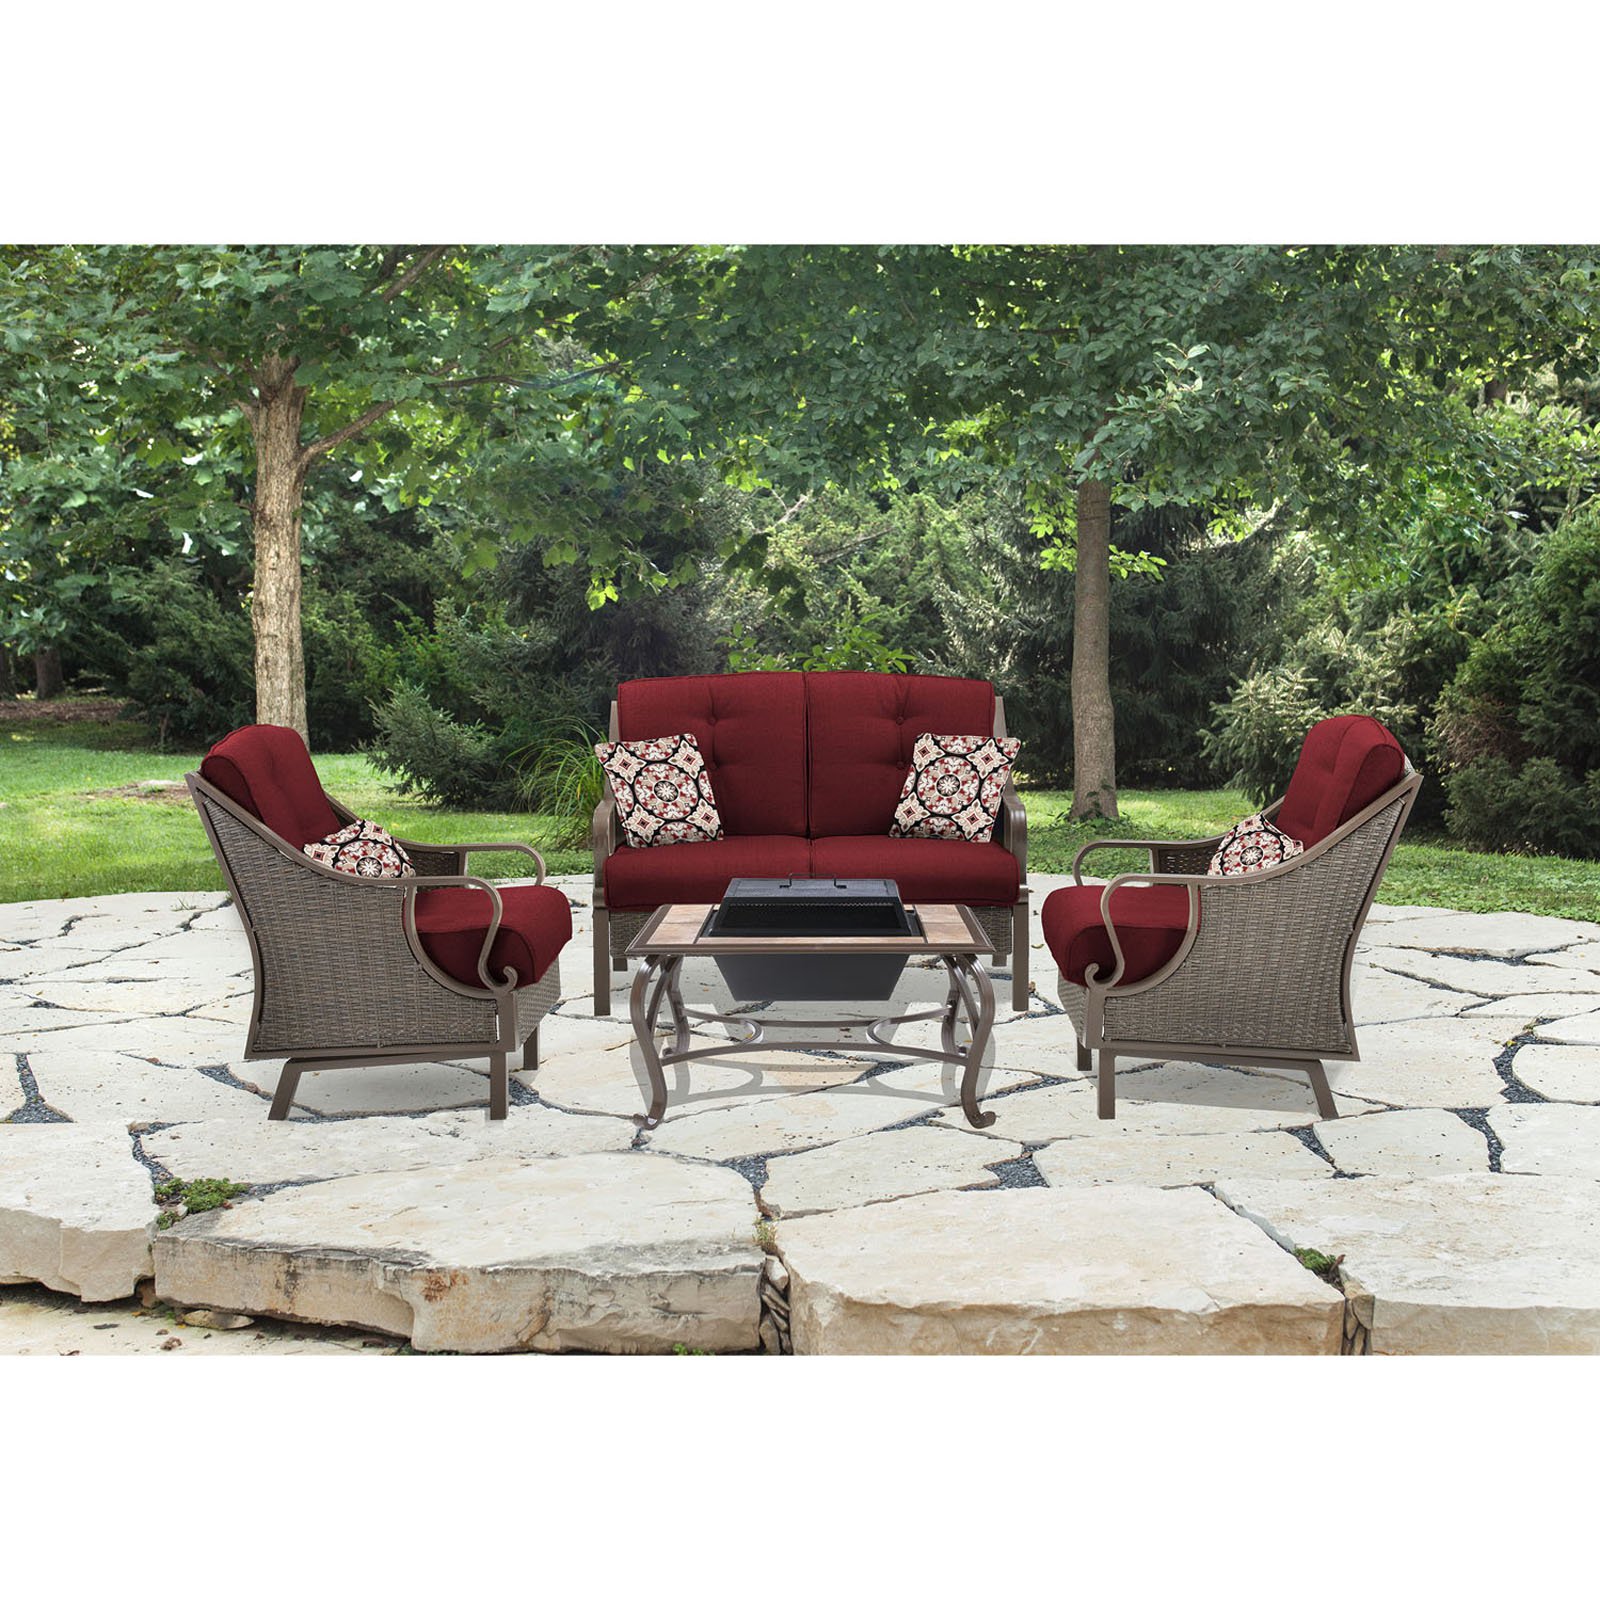 Hanover Ventura 4-Piece Conversation Set with Wood-Burning Fire Pit - image 1 of 9